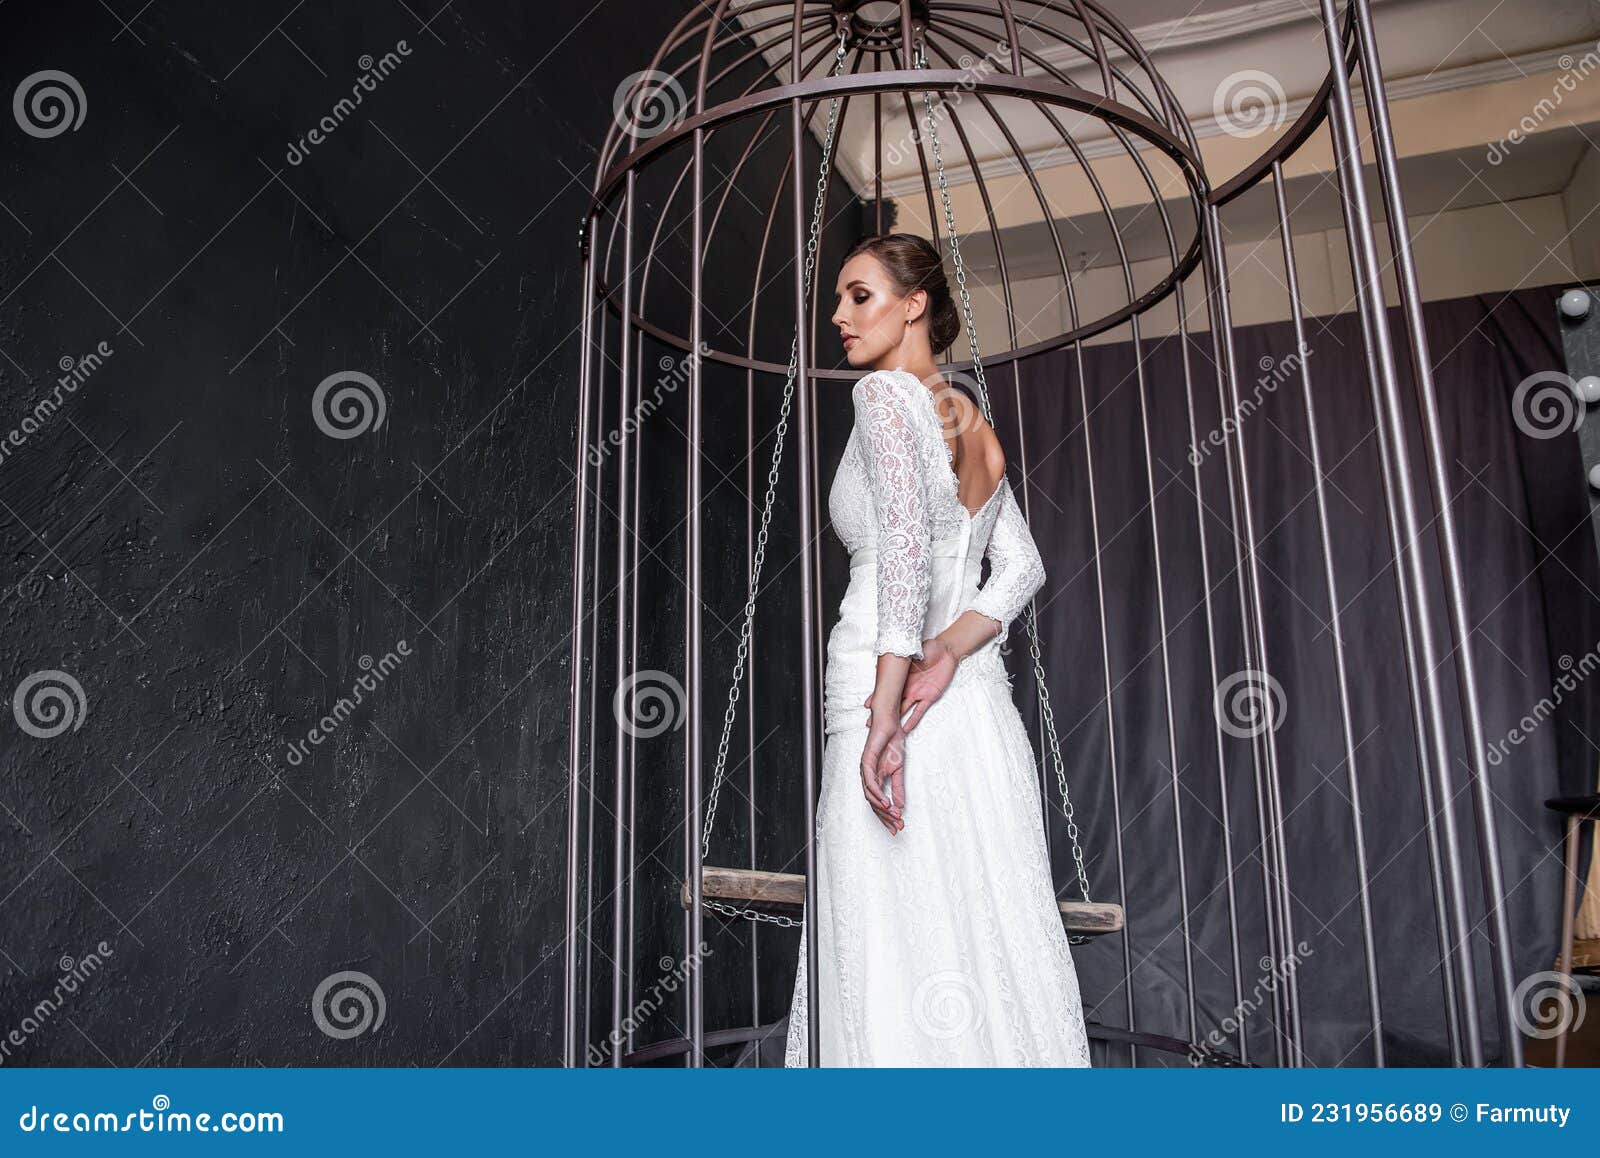 Fashion Bride In An Iron Cage Unhappily Looking Out From Behind Bars Life Out Of Will Stock